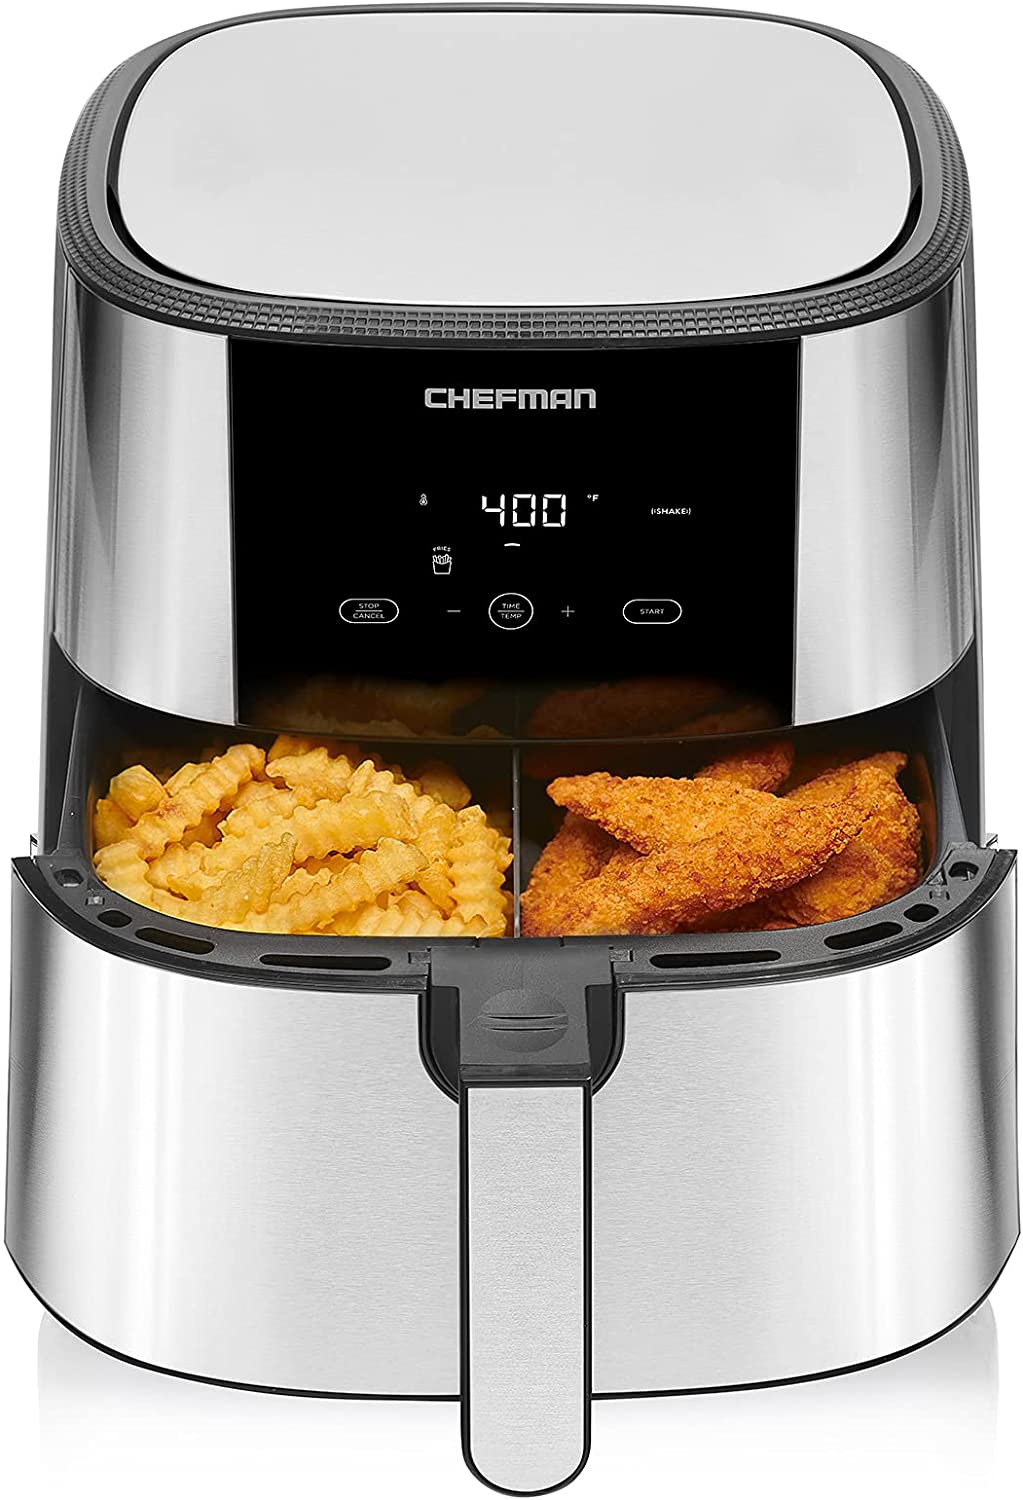 8-Qt Chefman 2-in-1 Max XL Air Fryer Digital Touch Screen w/ 4 Cooking Functions (Stainless Steel) $52.59 + Free Shipping